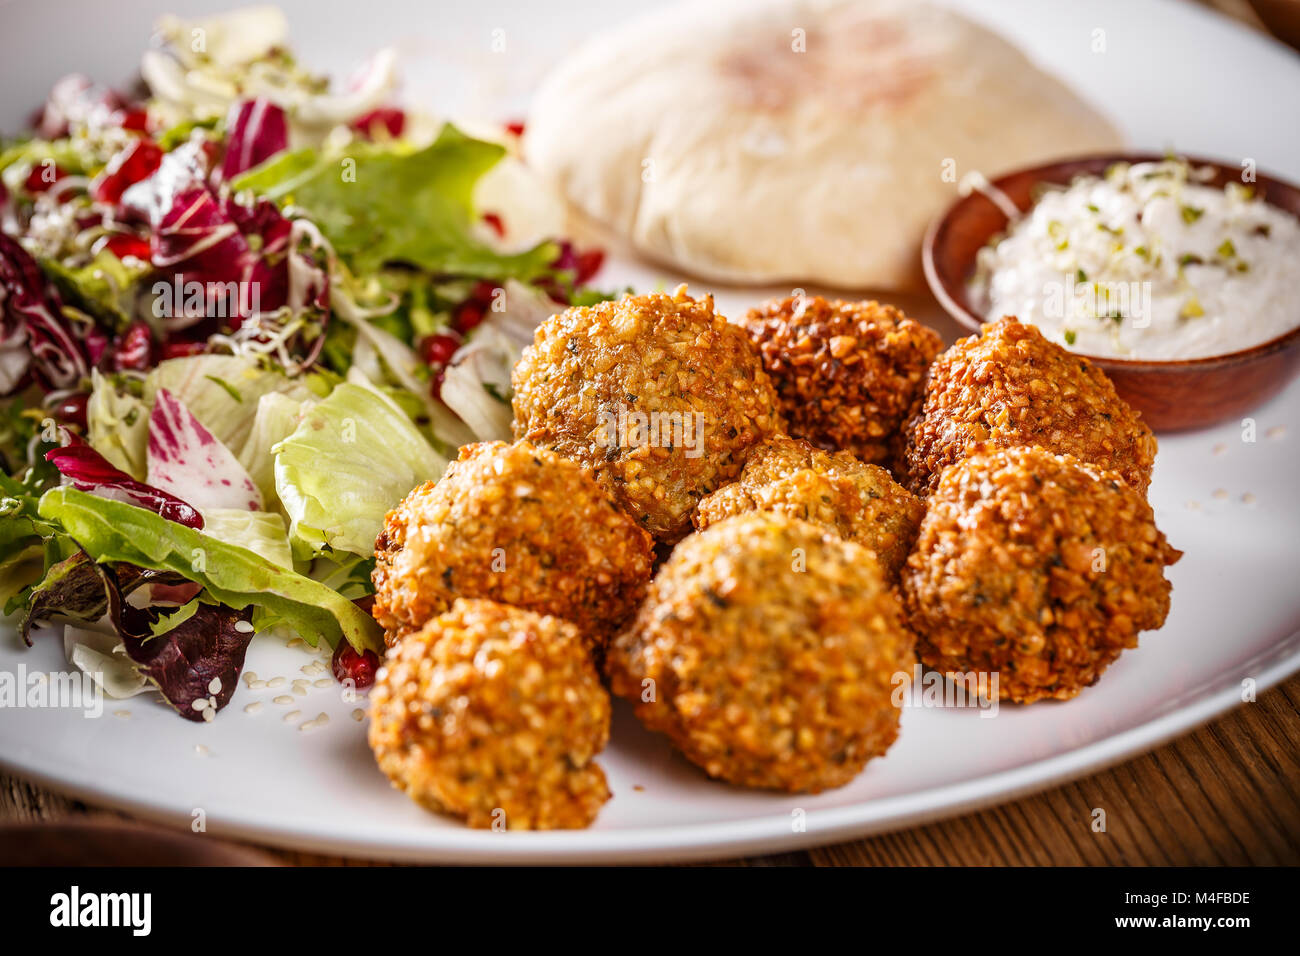 Chickpea falafel balls on a wooden desk with vegetables Stock Photo